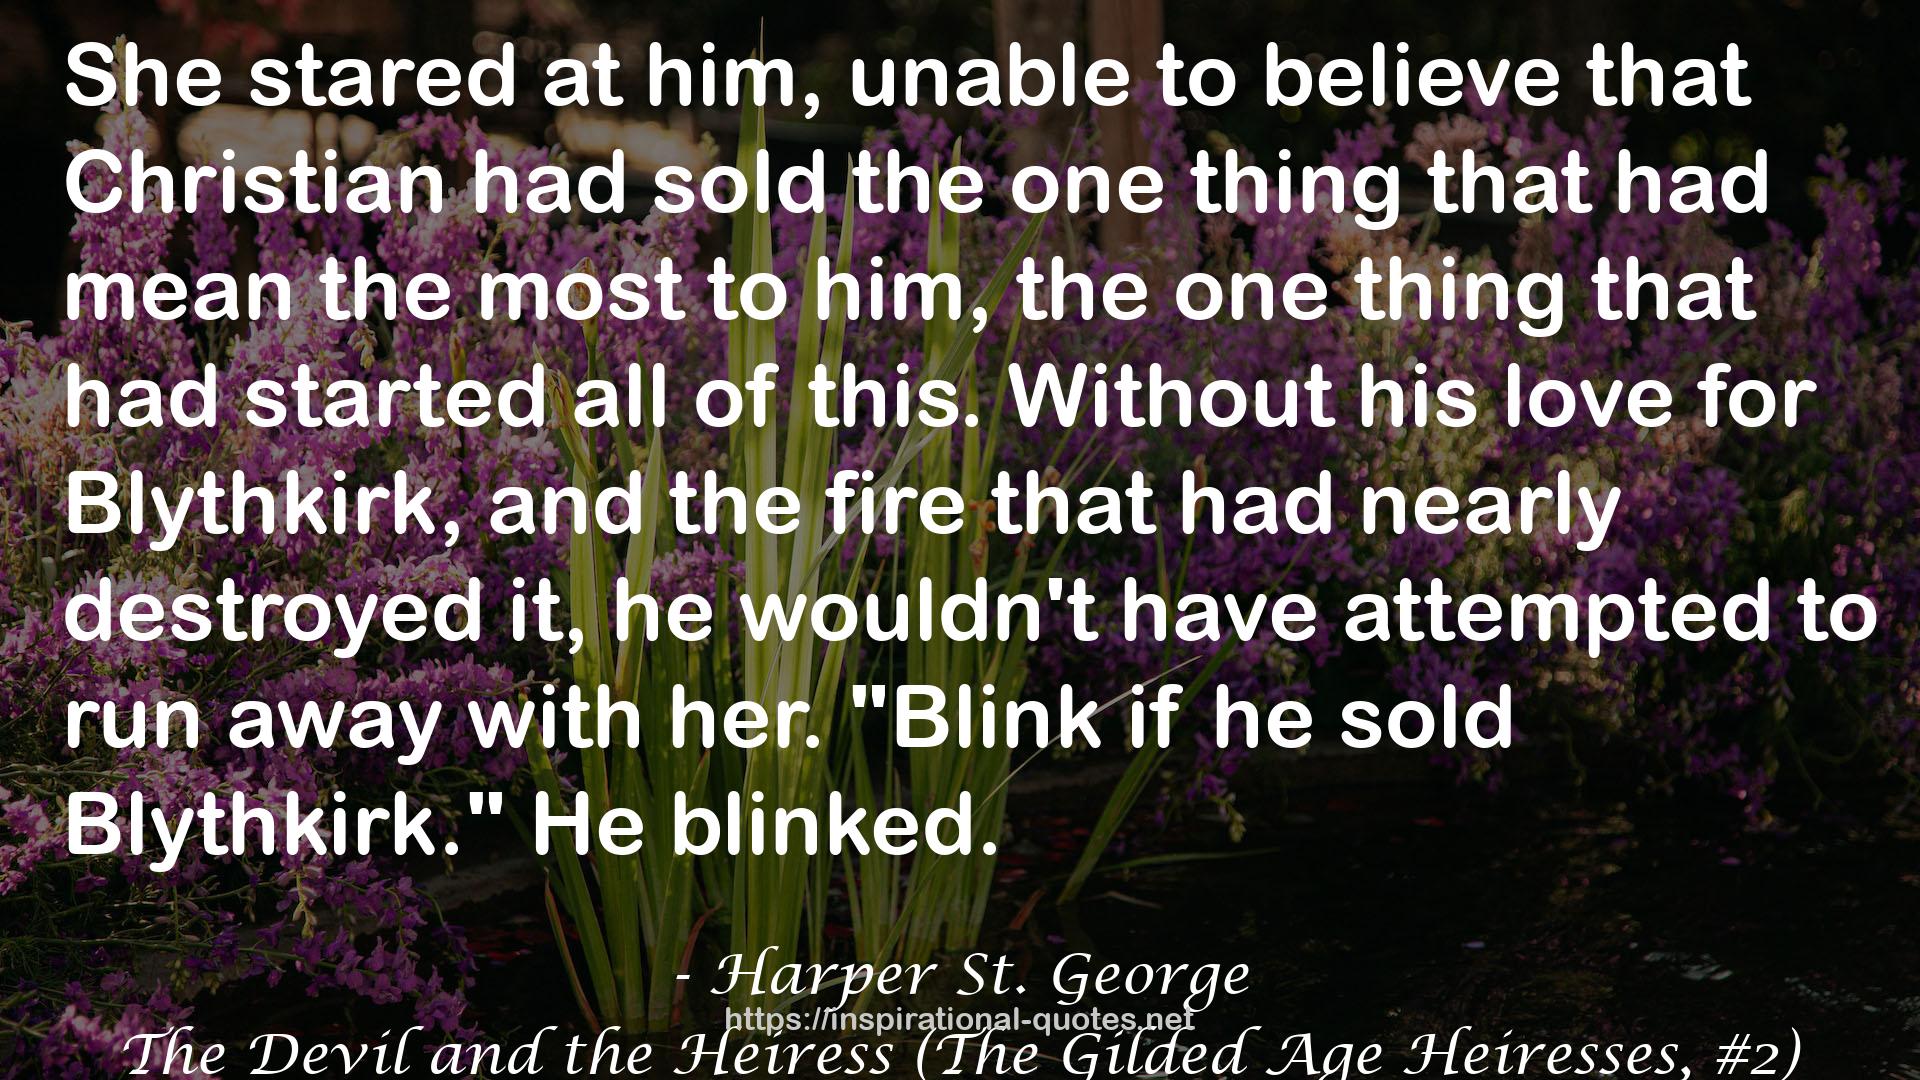 The Devil and the Heiress (The Gilded Age Heiresses, #2) QUOTES